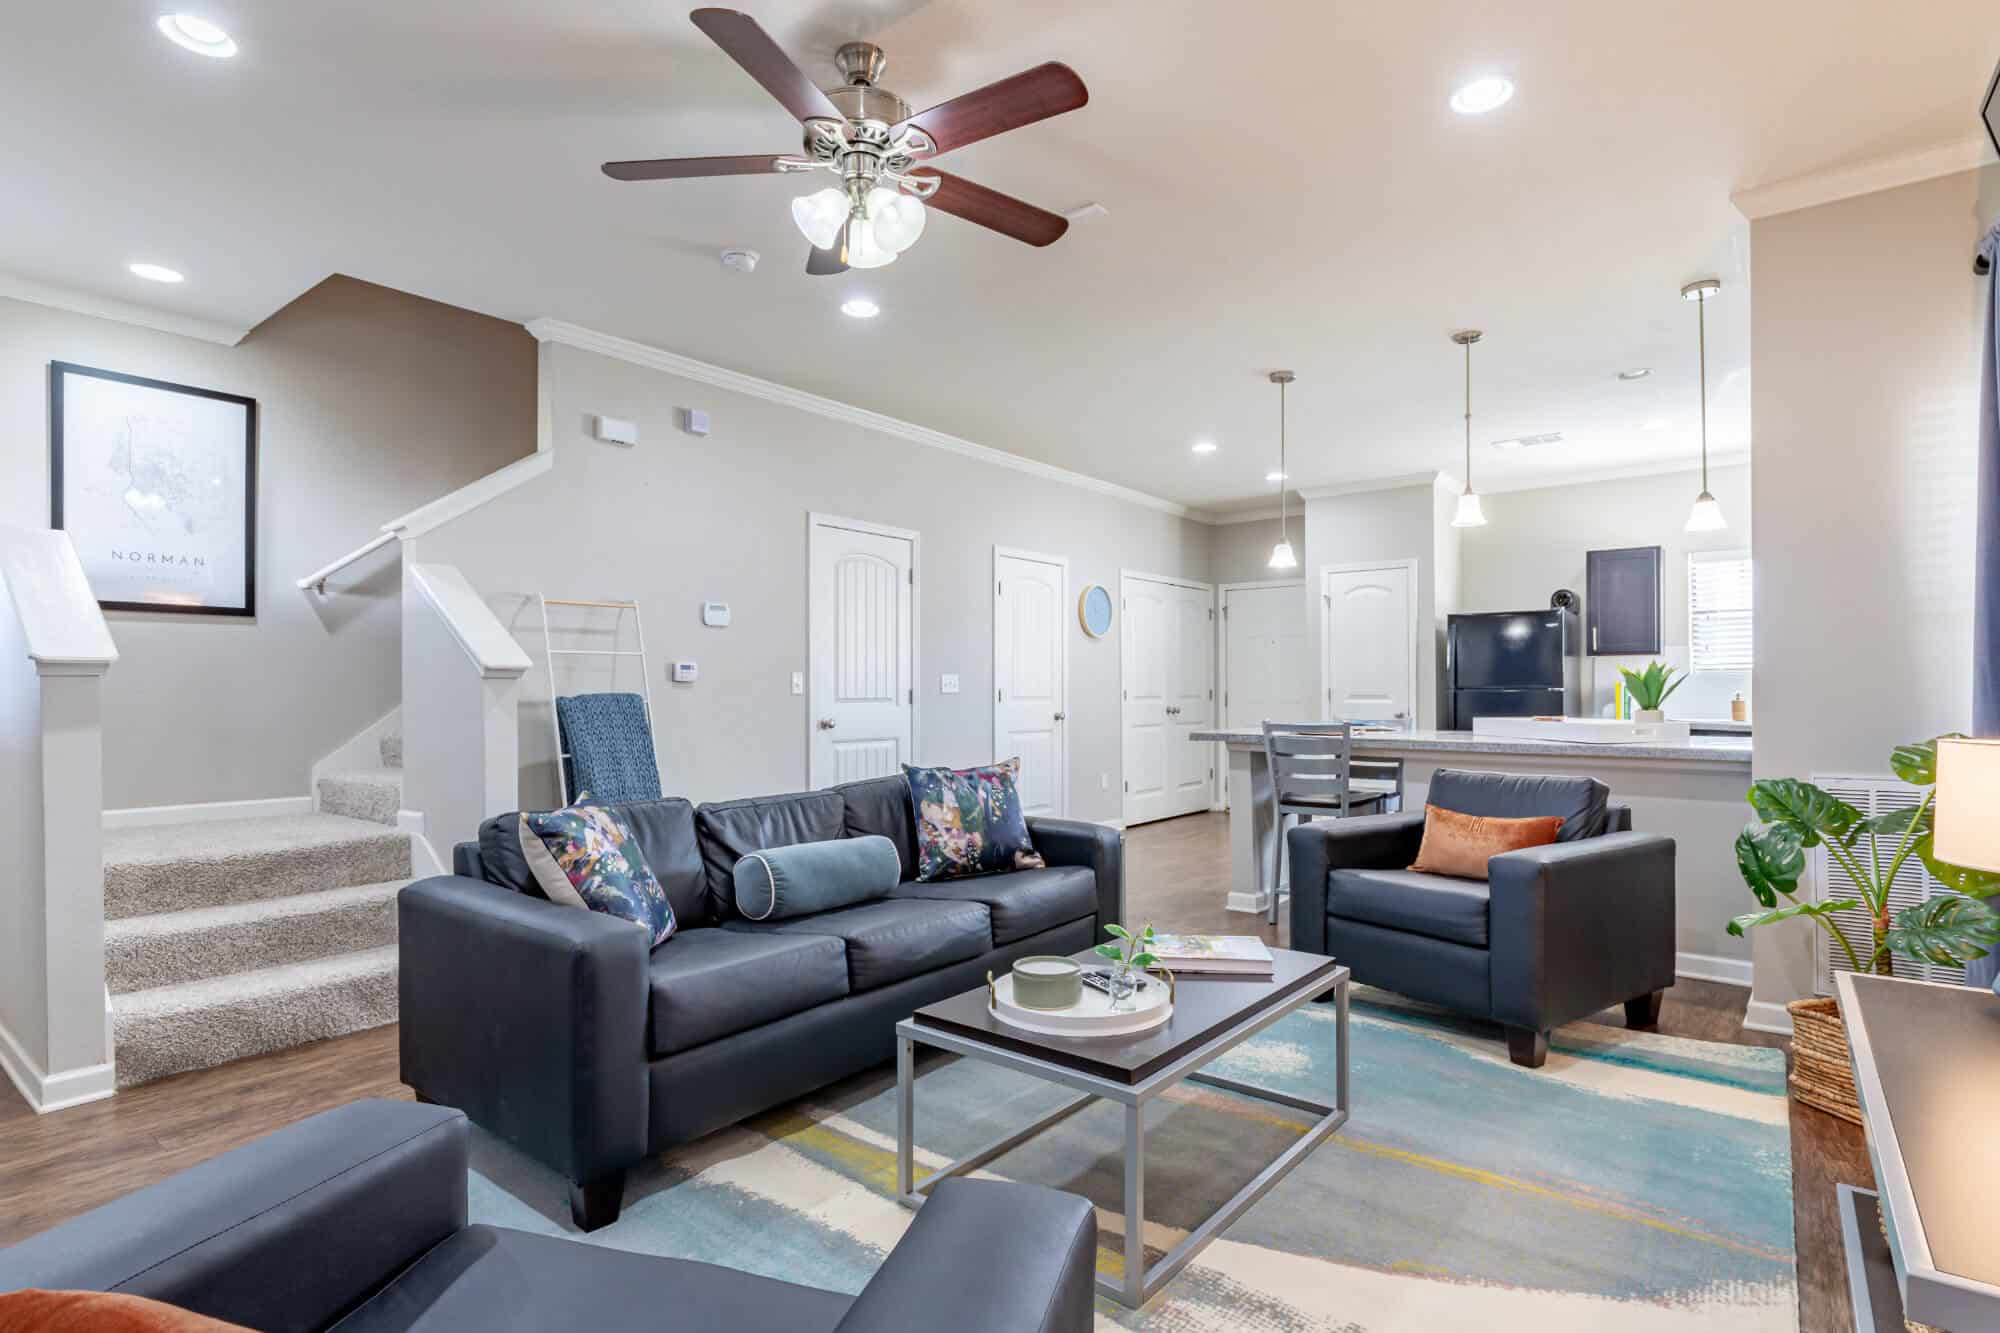 the collective at norman off campus cottage apartments furnished and unfurnished options 2 story floor plans living room with smart tv